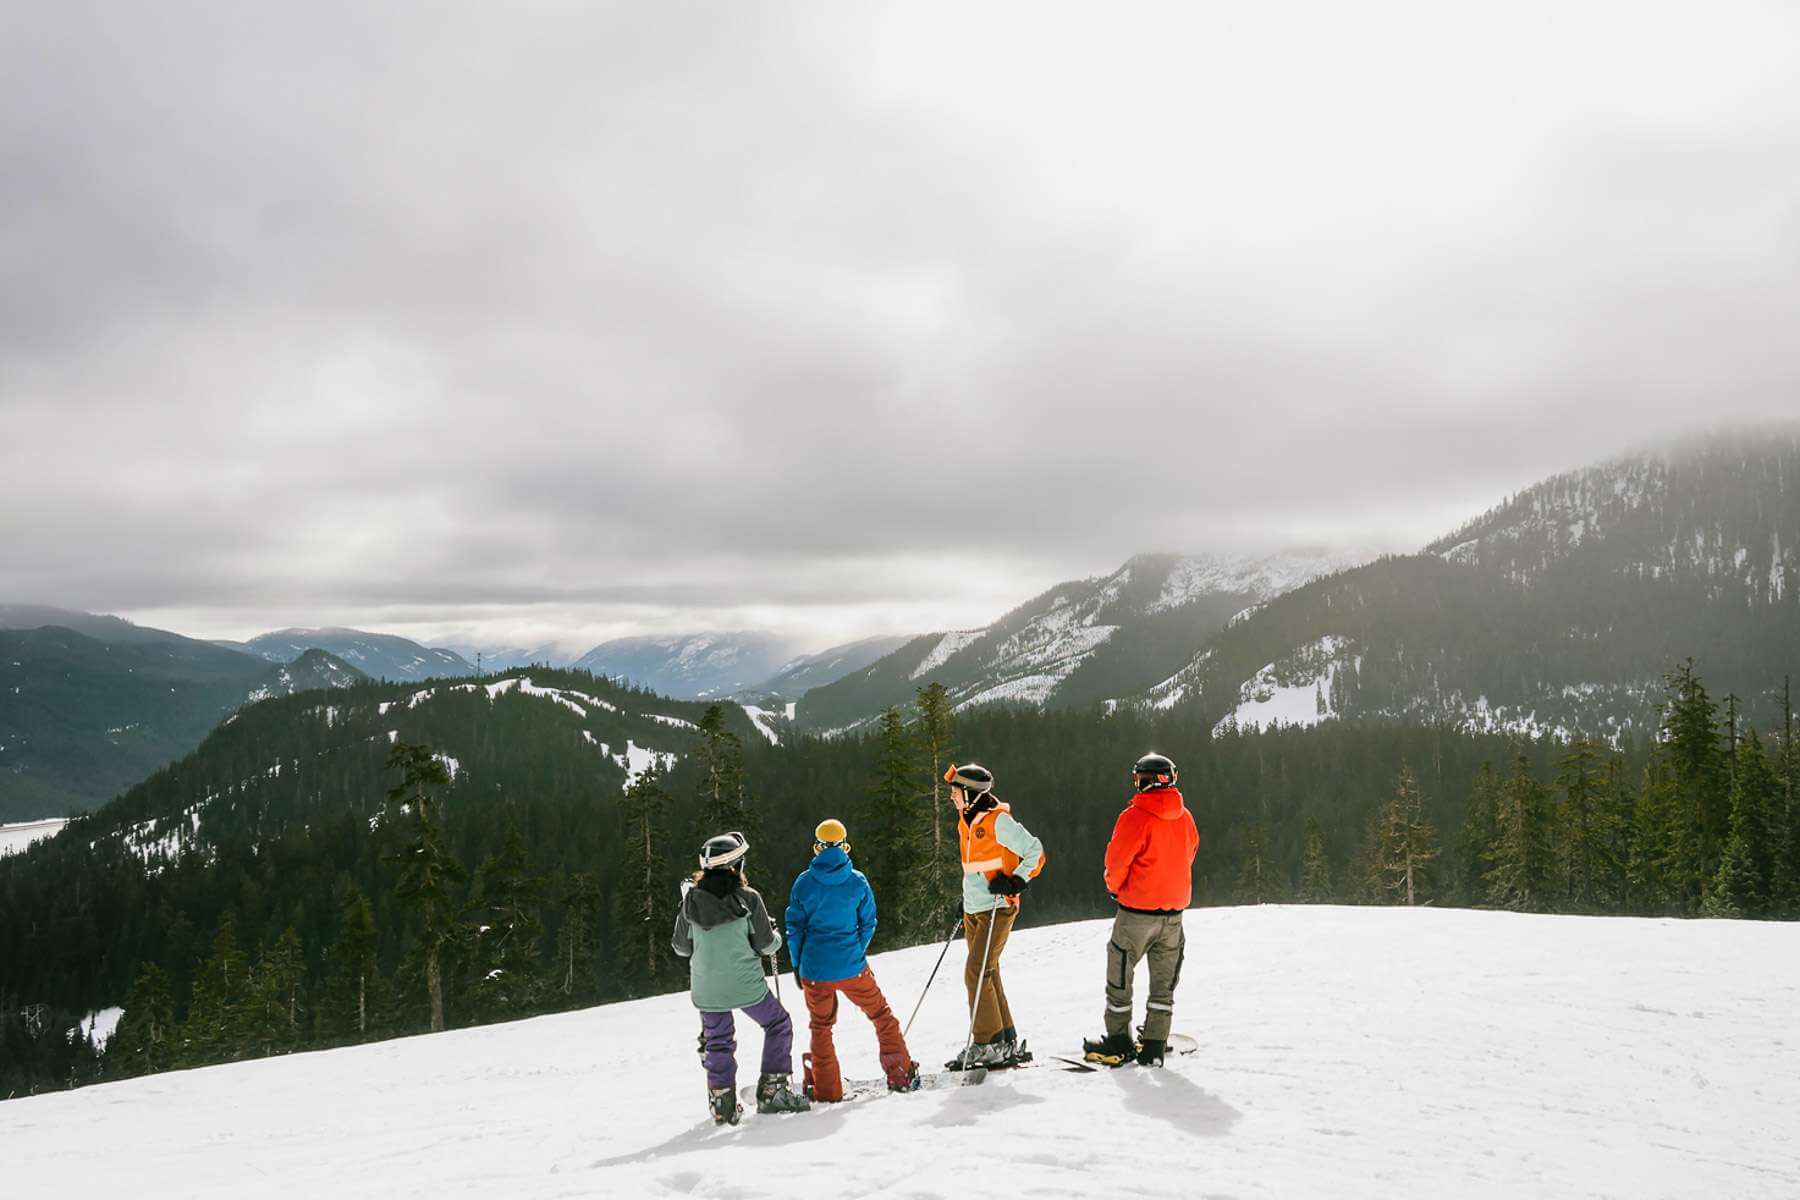 Four people in ski gear stand in the snow looking down from a mountain